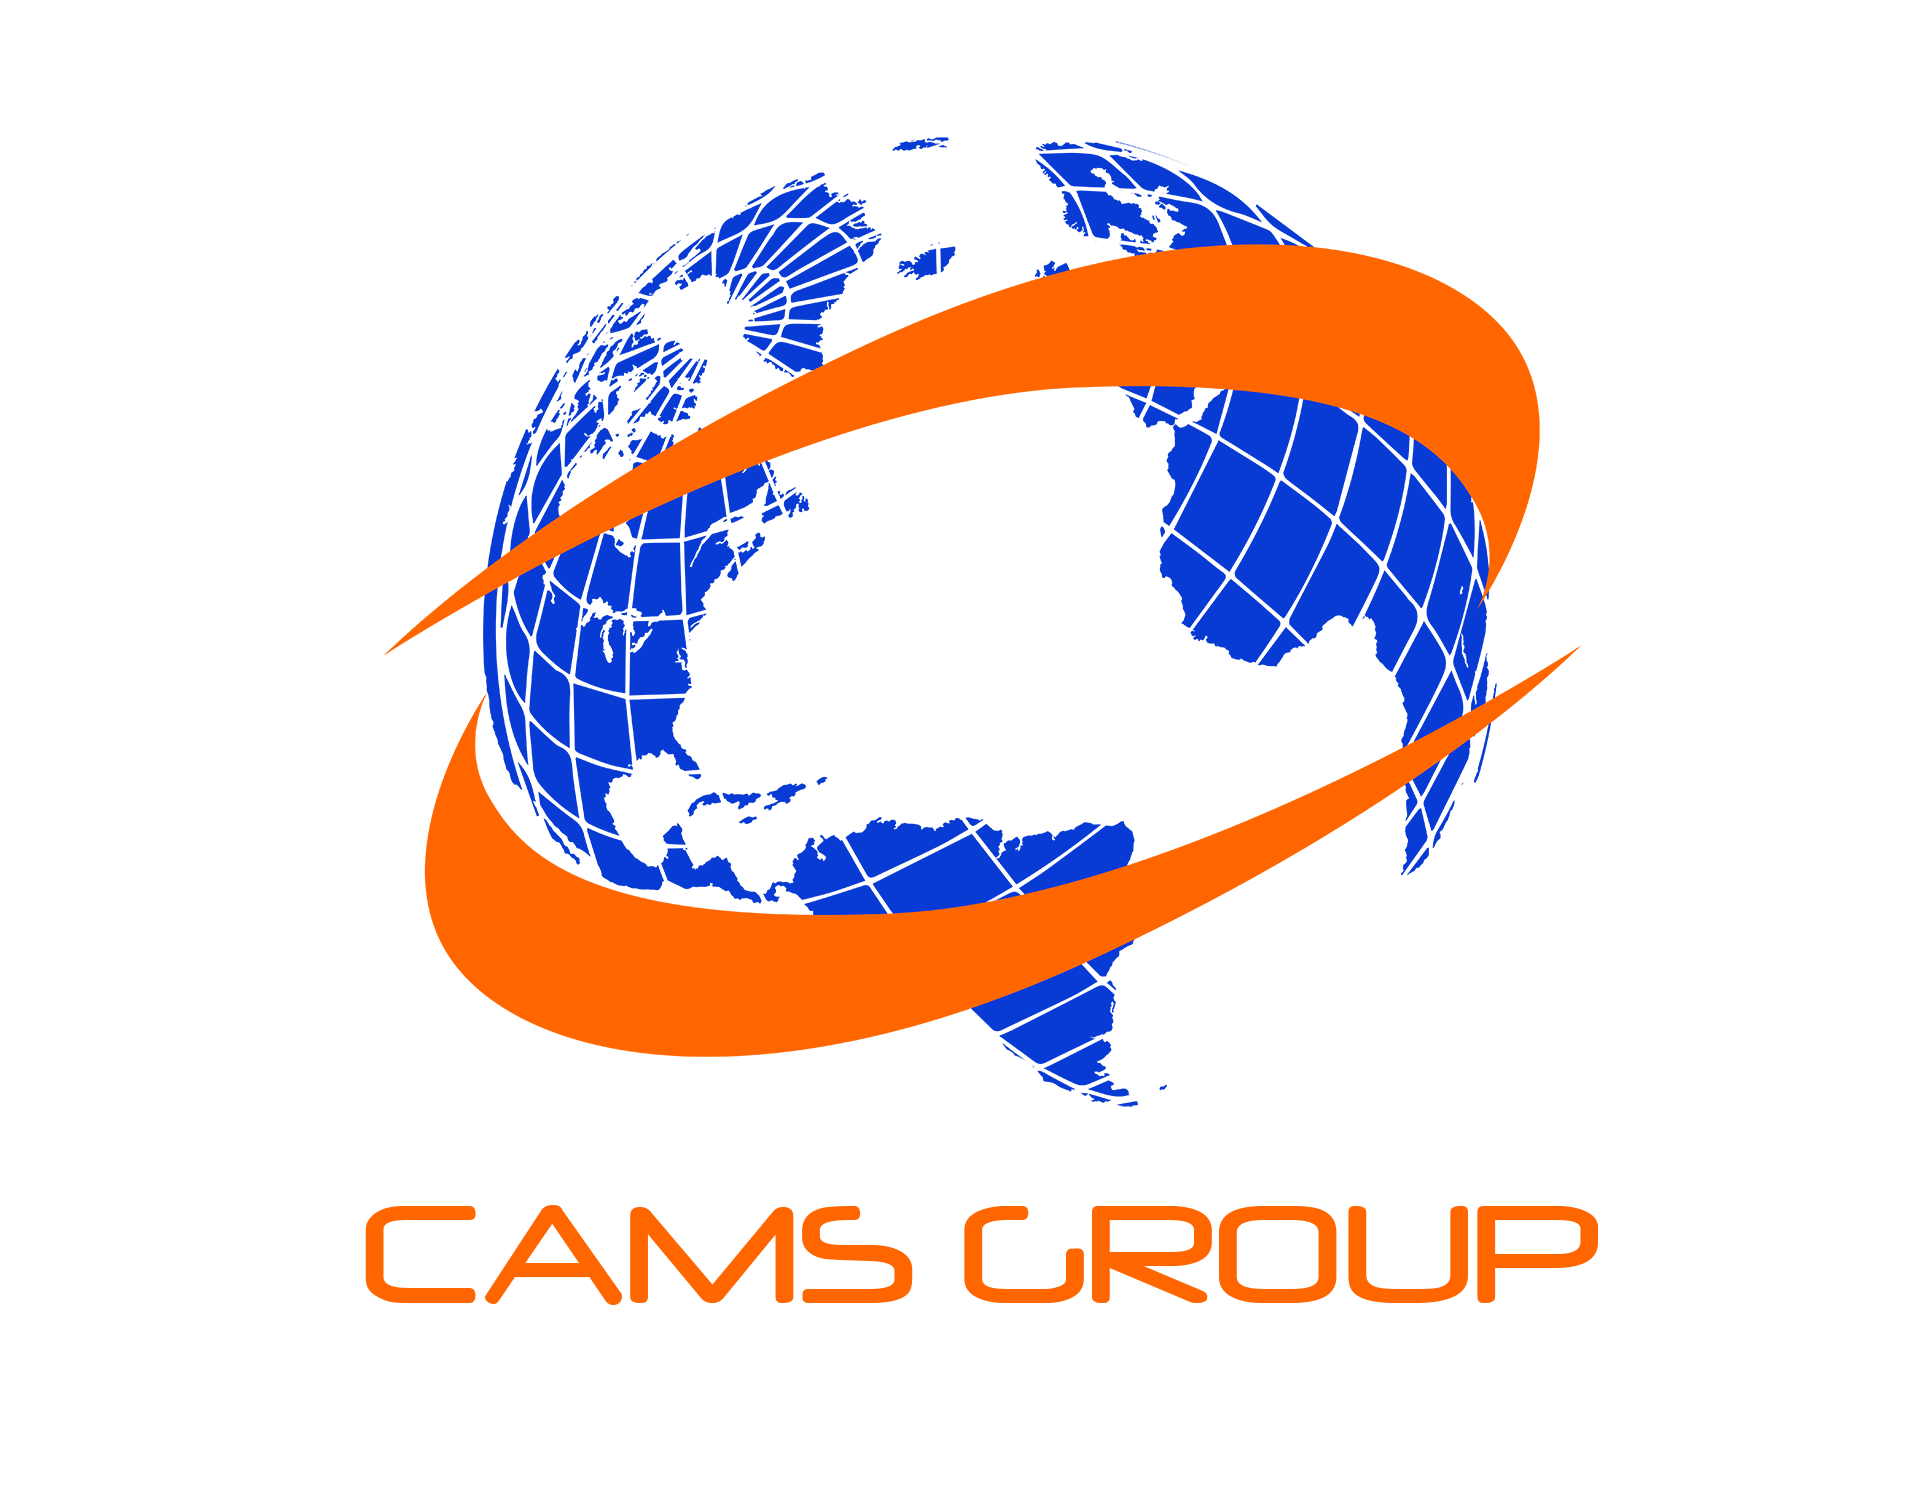 CAMS Group